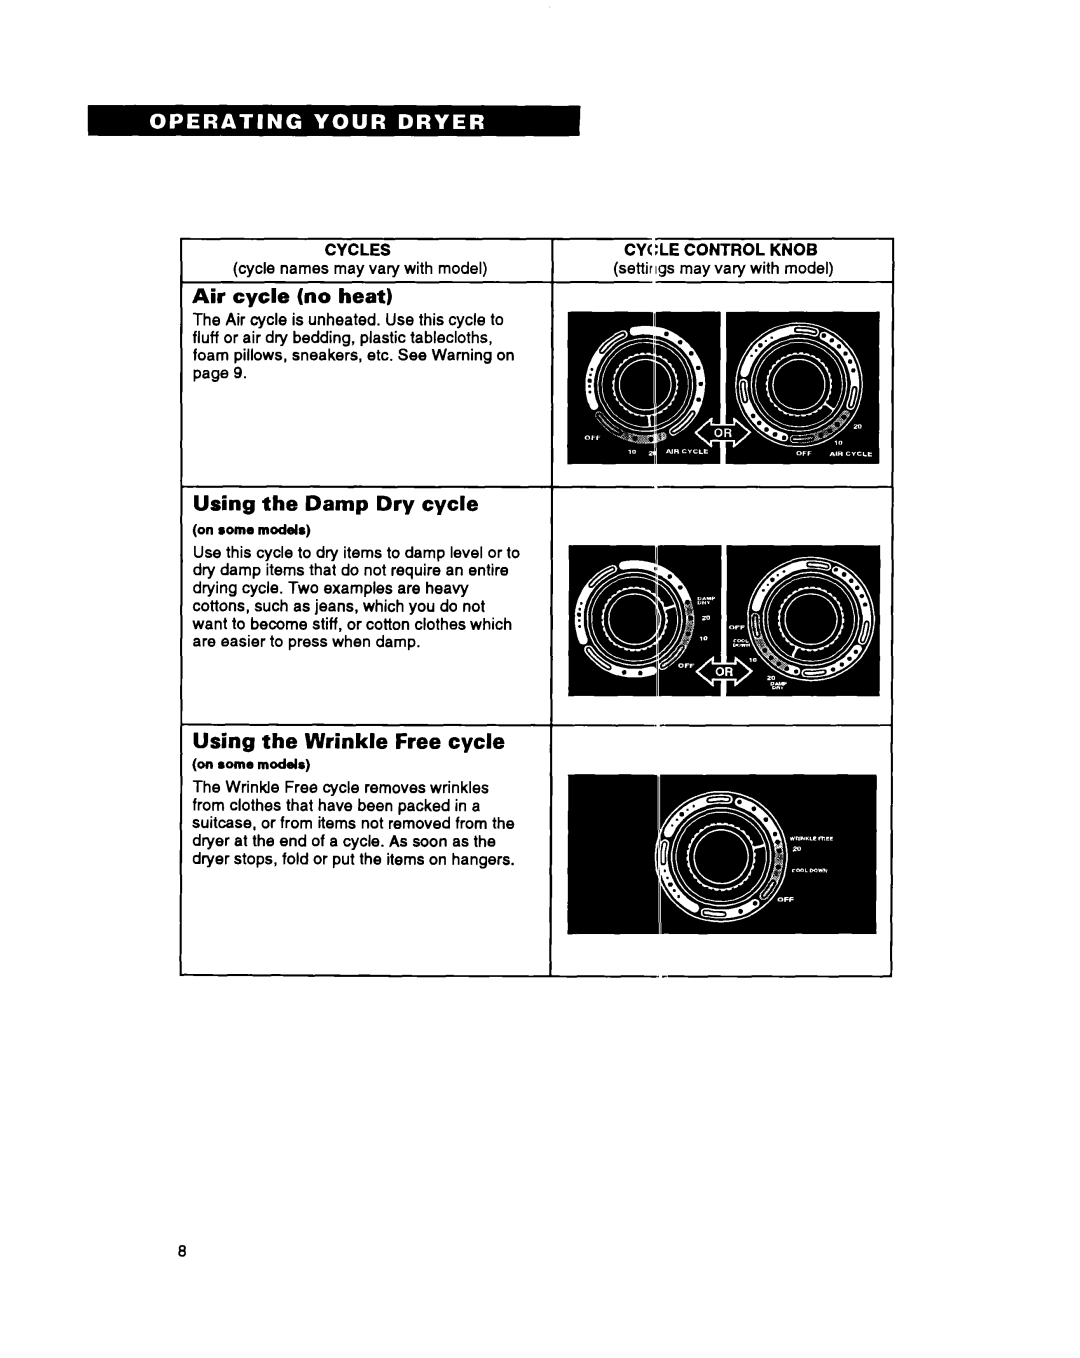 Whirlpool 3396311 manual Air cycle no heat, Using the Damp Dry cycle, Using the Wrinkle Free cycle 